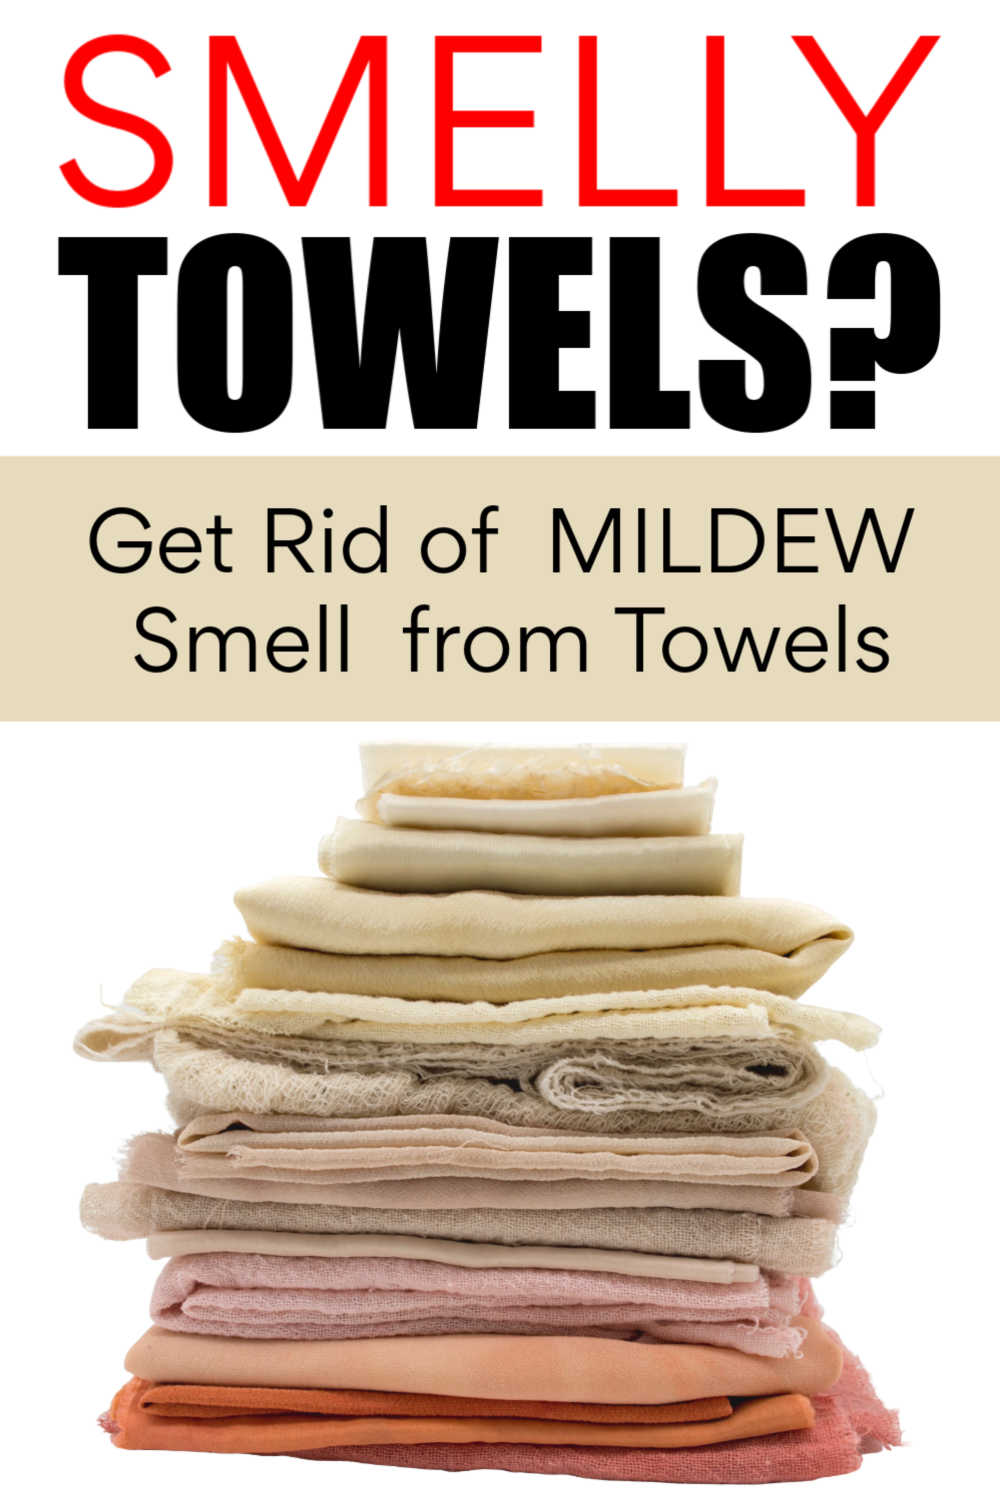 How To Get Mildew Smell Out of Towels - Keep Them Smelling Fresh and Clean